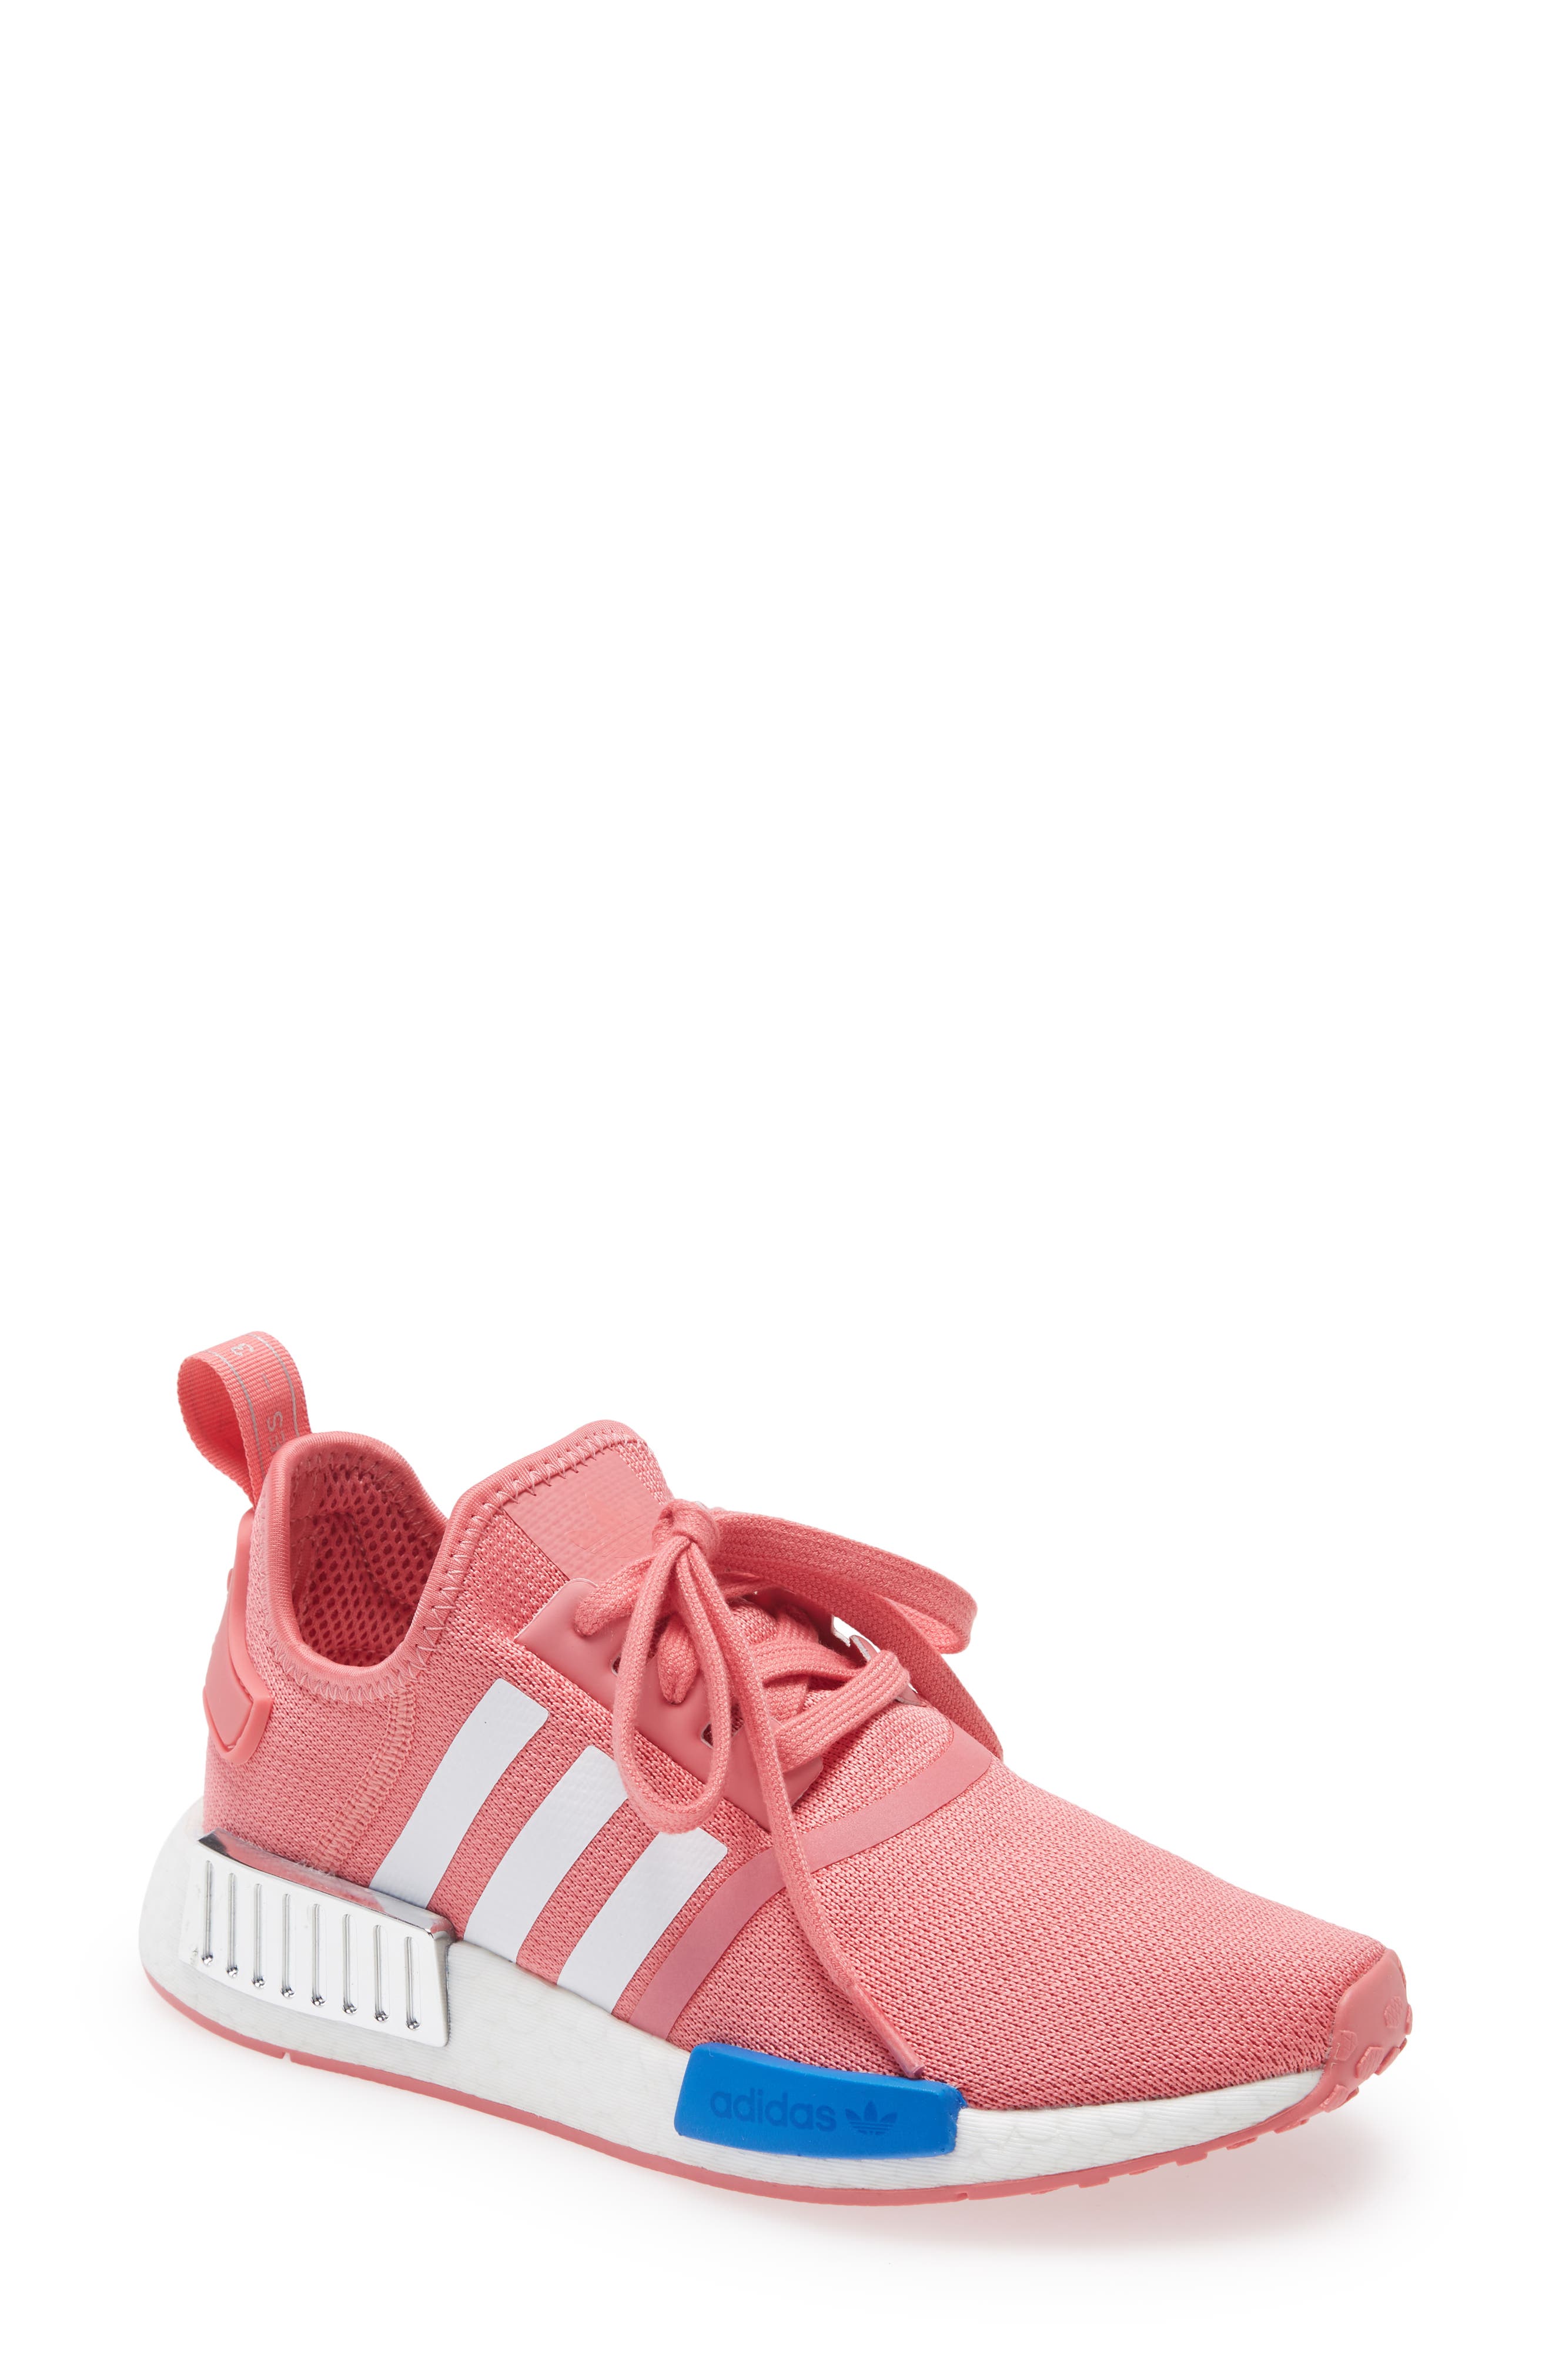 adidas shoes 2016 nmd pink